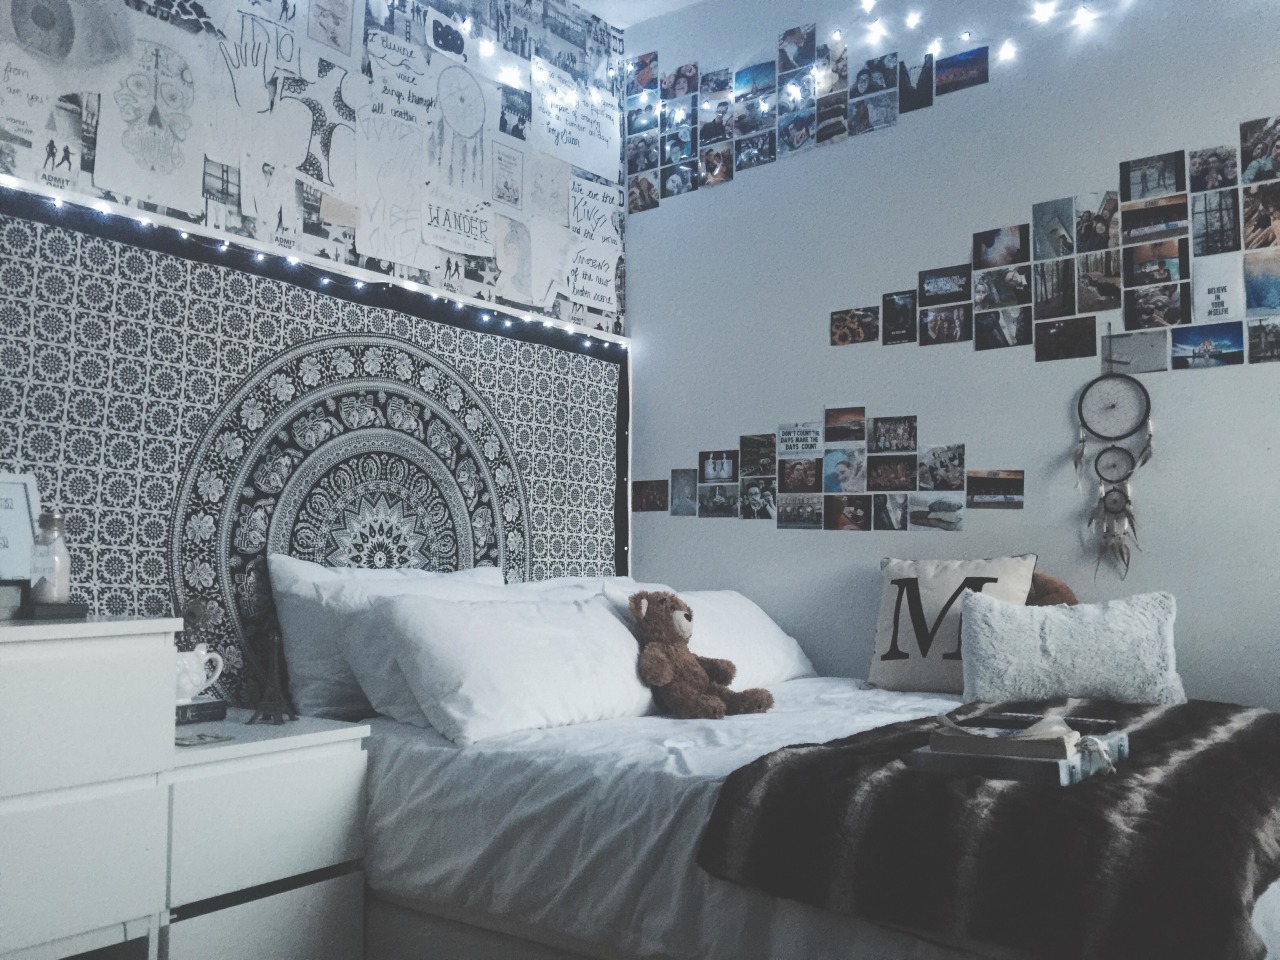 Awesome hipster bedroom ideas tumblr Tumblr Bedrooms